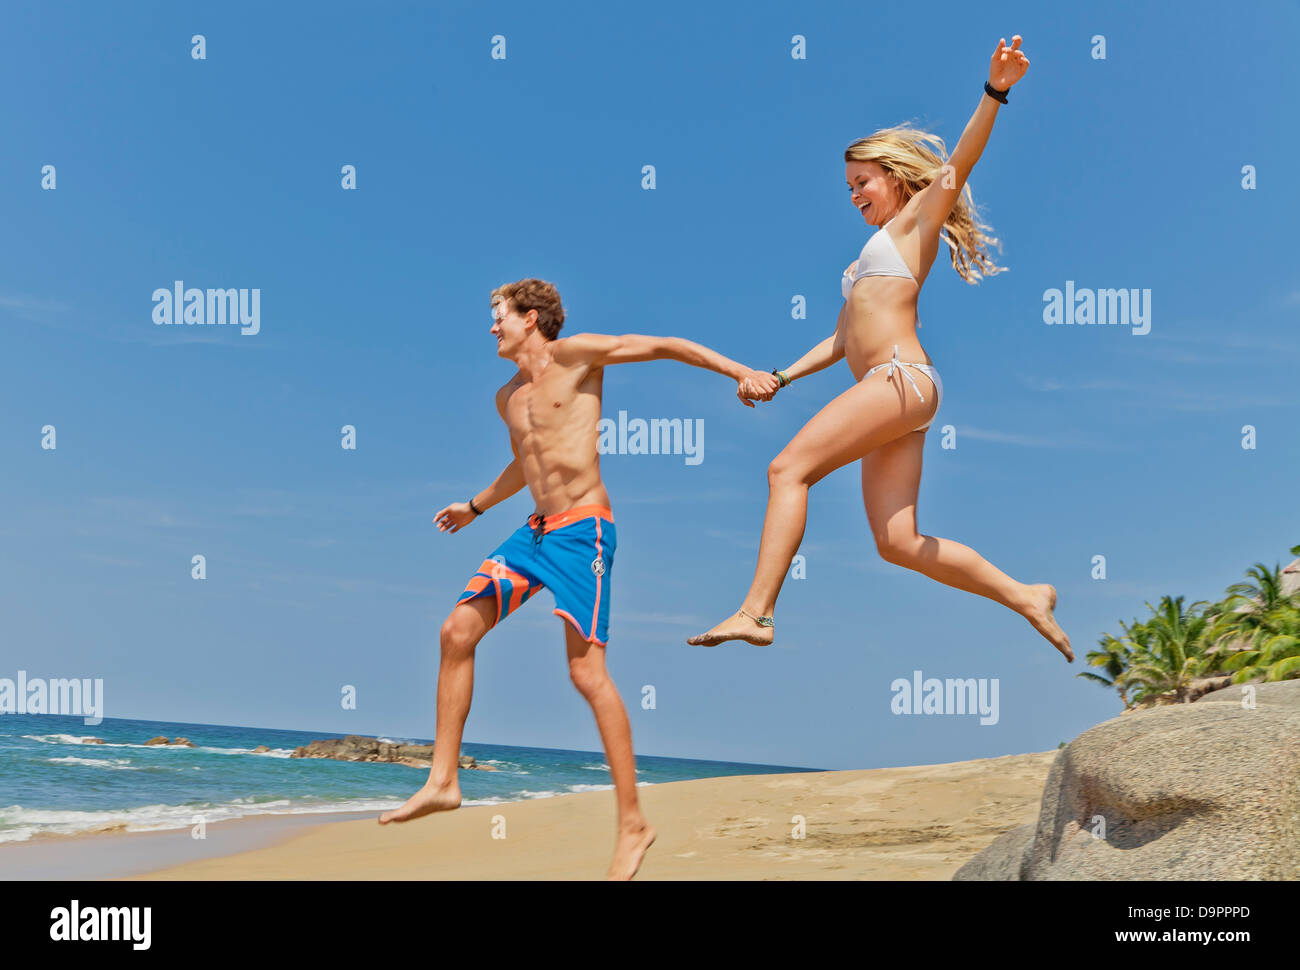 Young man and woman running on beach Banque D'Images